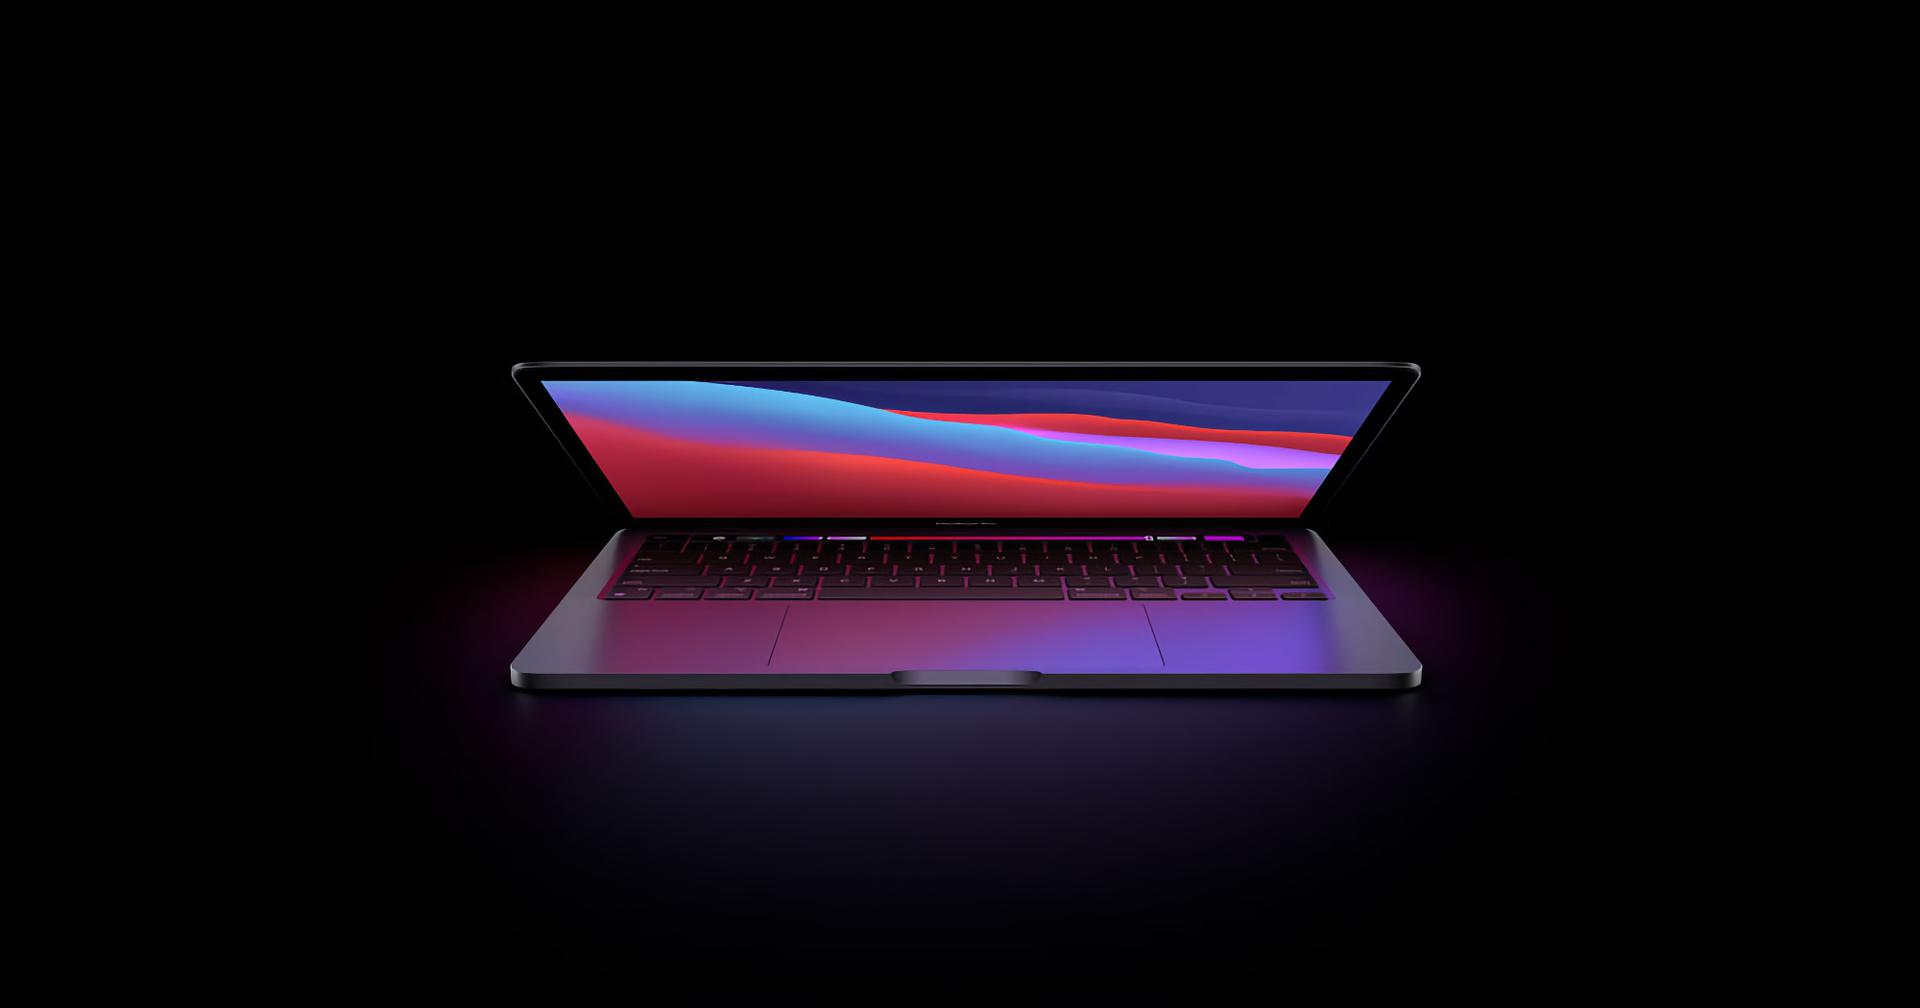 Insider: New MacBook Pro to receive miniLED 120Hz screens